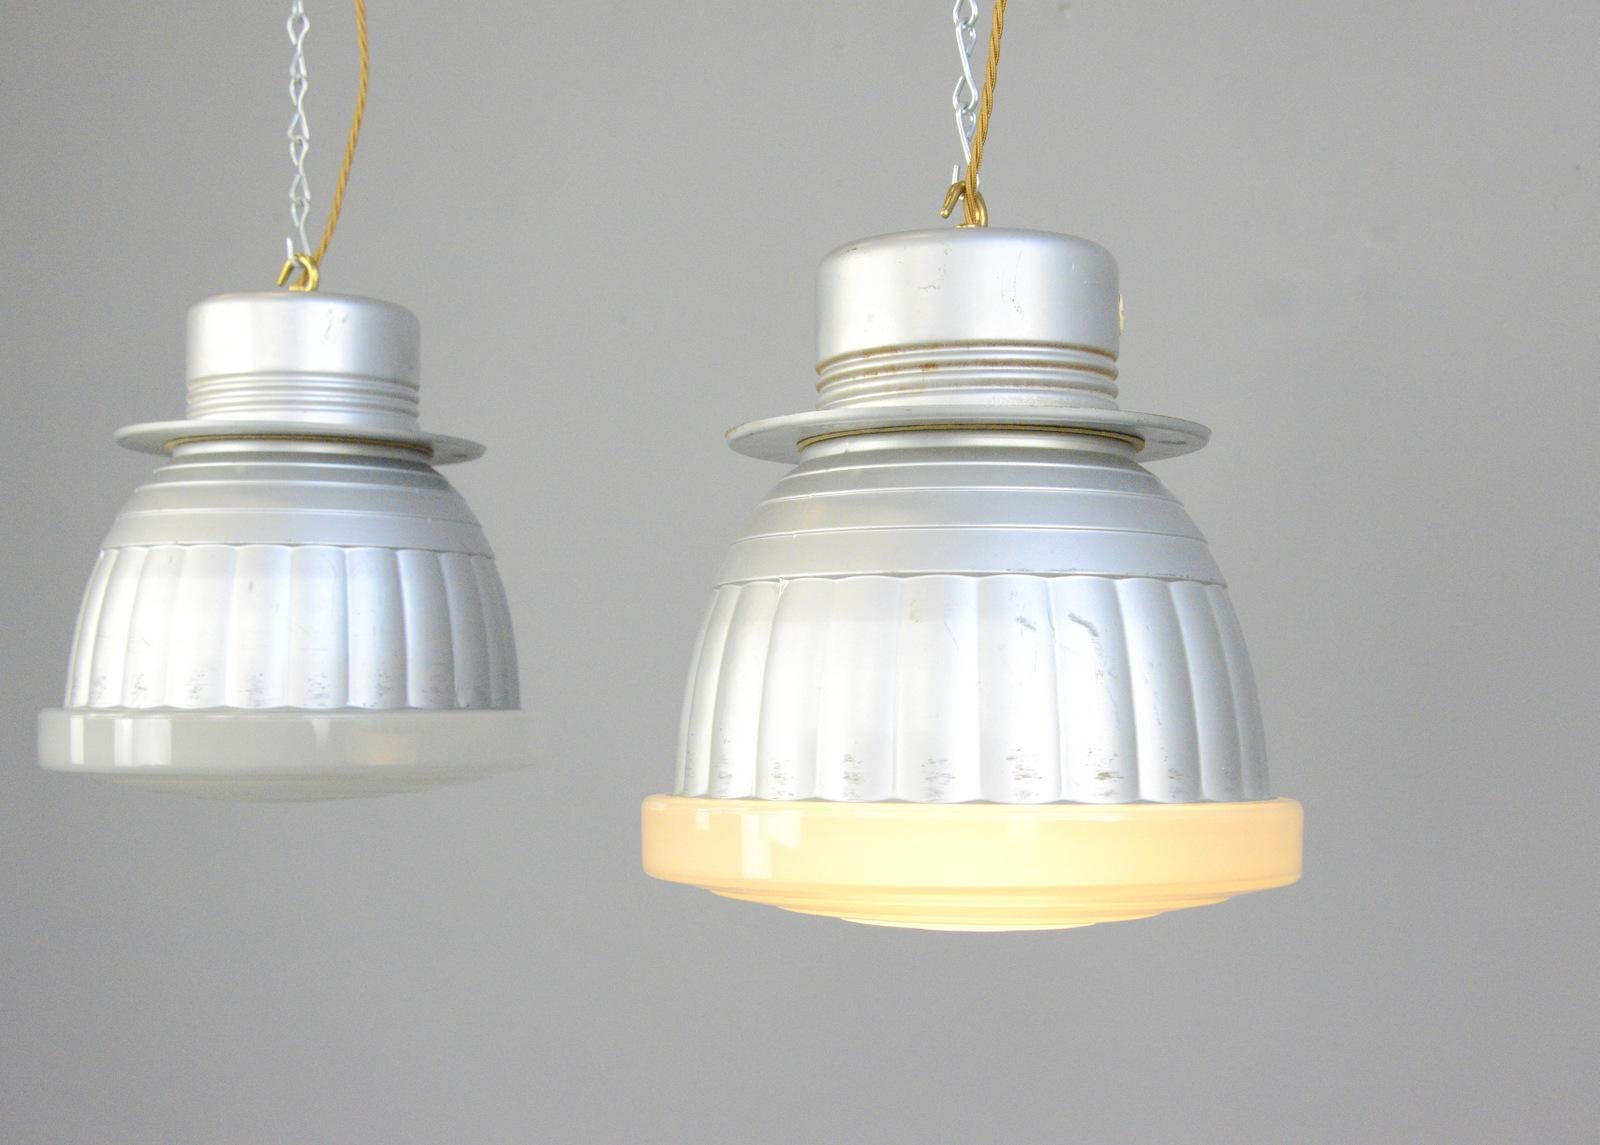 Bauhaus pendant lights by Adolf Meyer for Zeiss Ikon, circa 1920s

- Price is per light (4 available)
- Moulded glass with mercury inner reflectors
- Takes E27 fitting bulbs
- Comes with 100cm of gold twist cable and chain
- Designed by Adolf